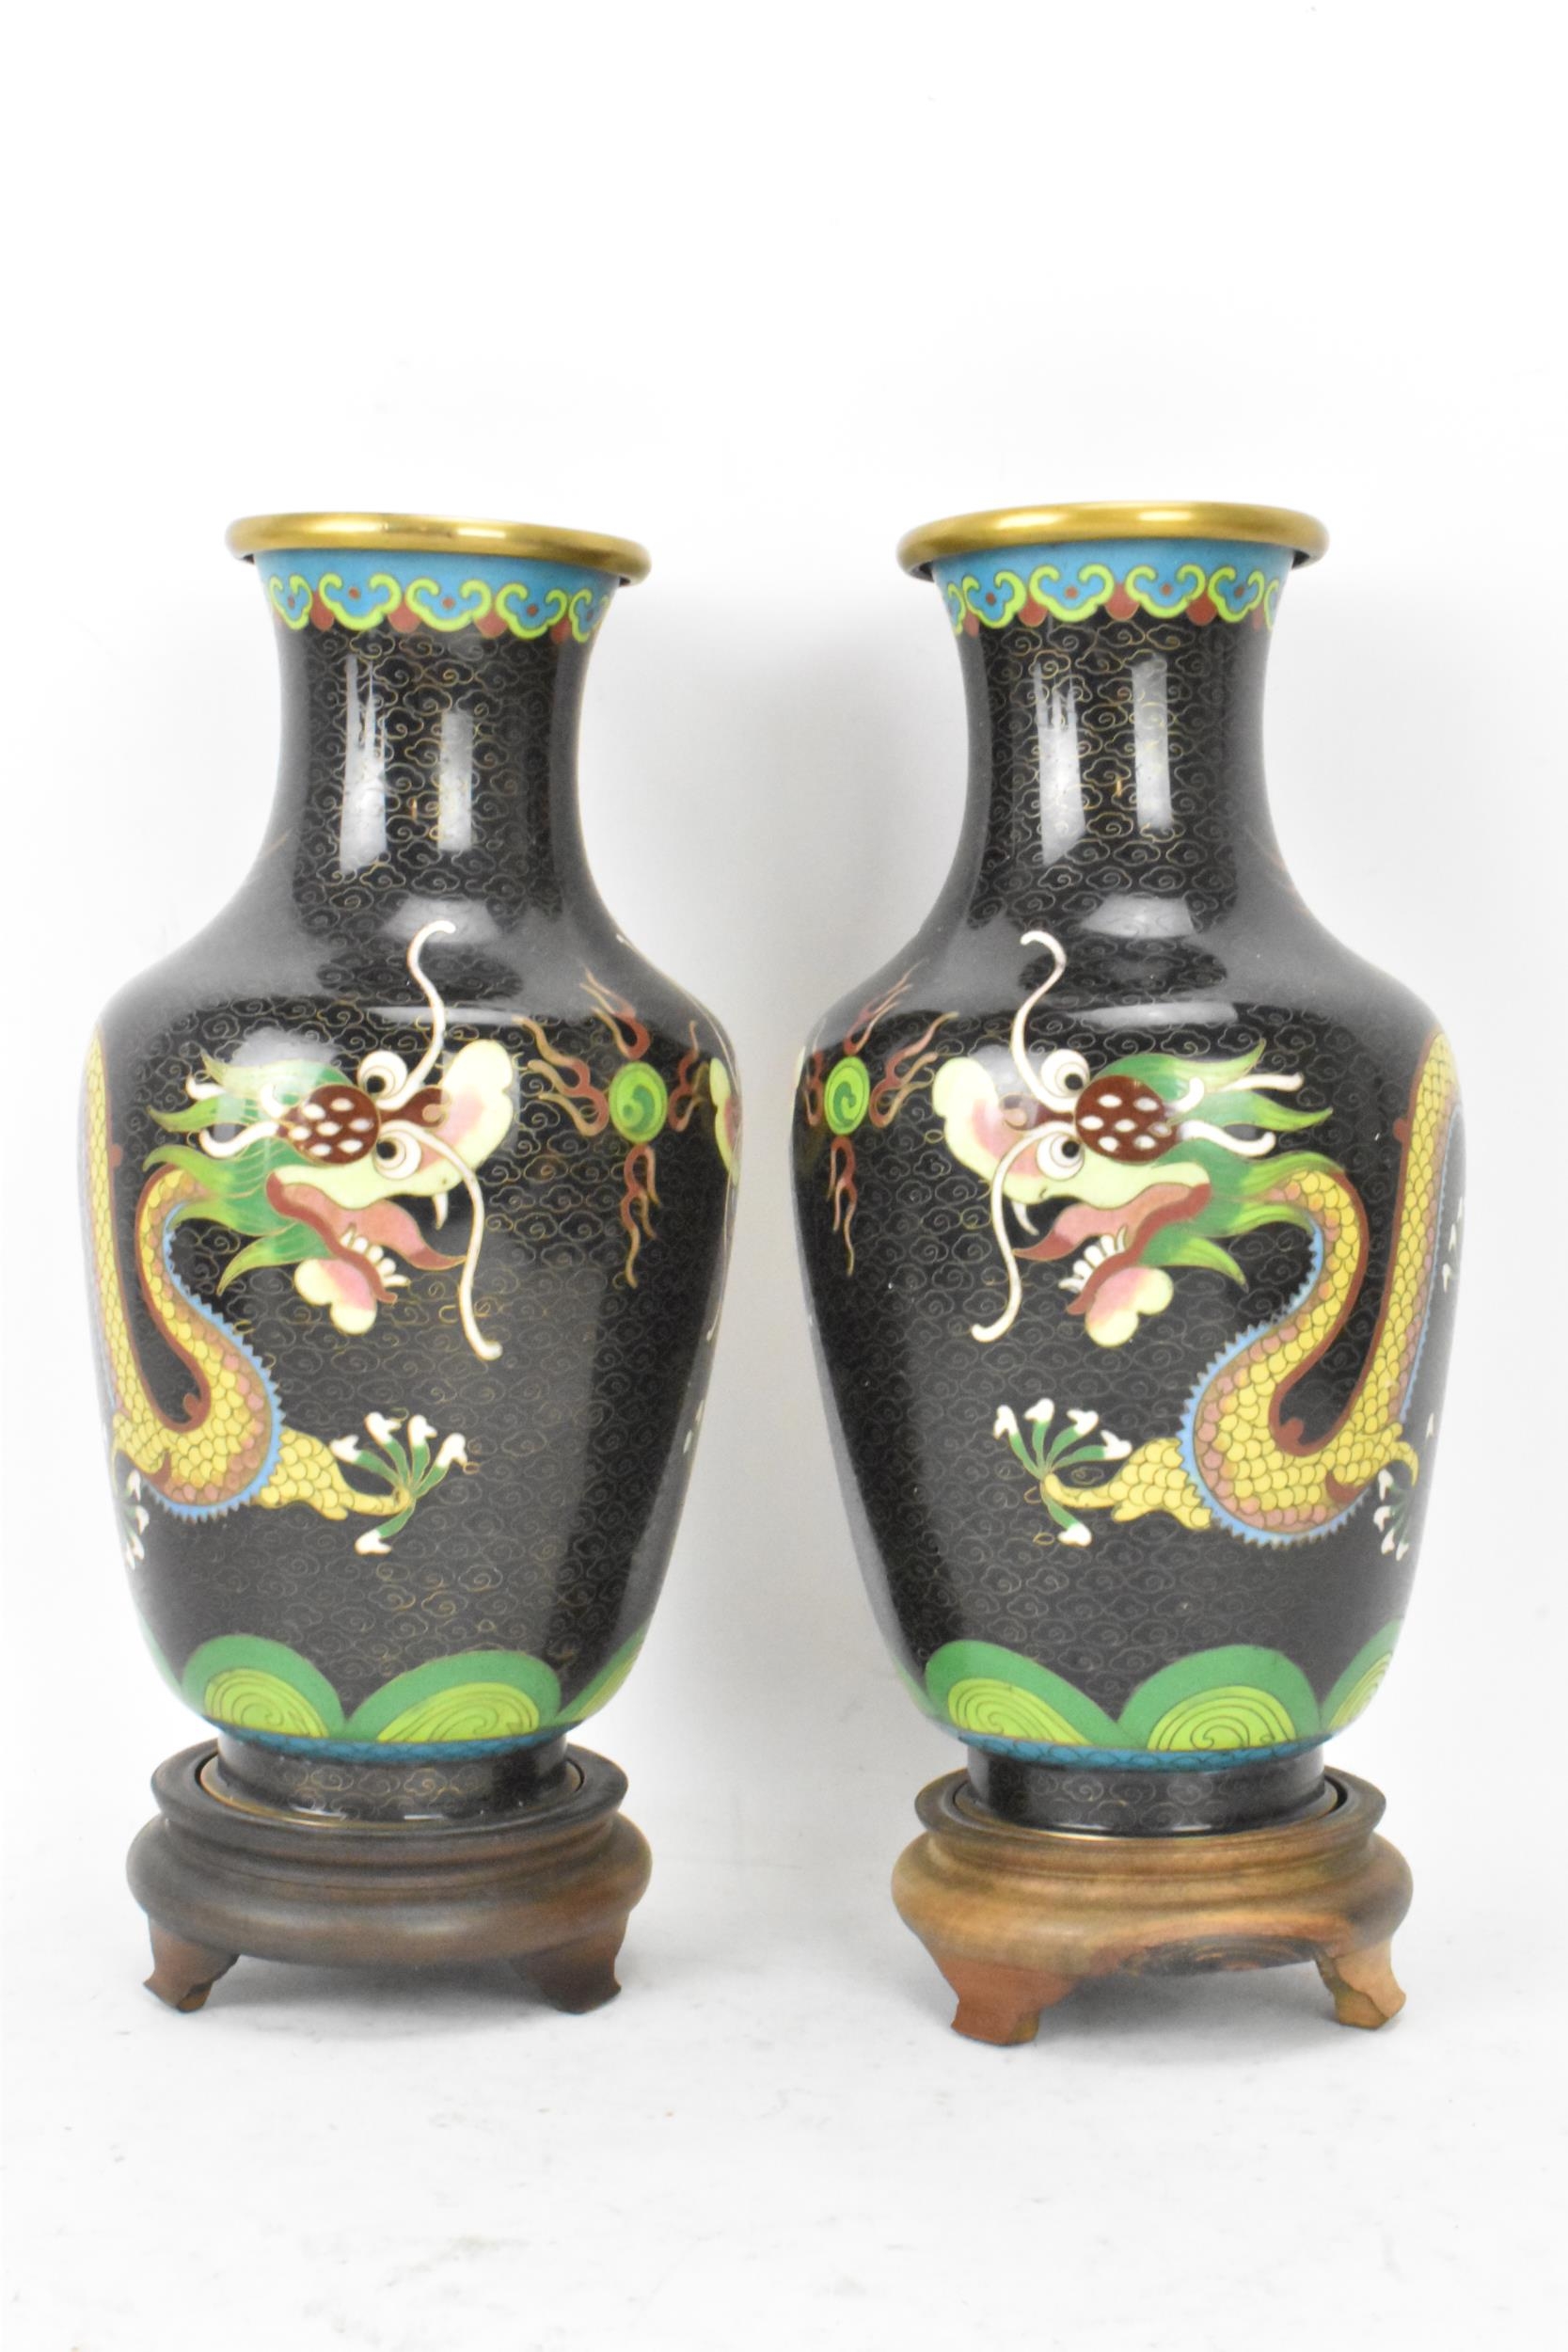 A pair of Chinese mid 20th century cloisonne vases, with black grounds decorated with confronting